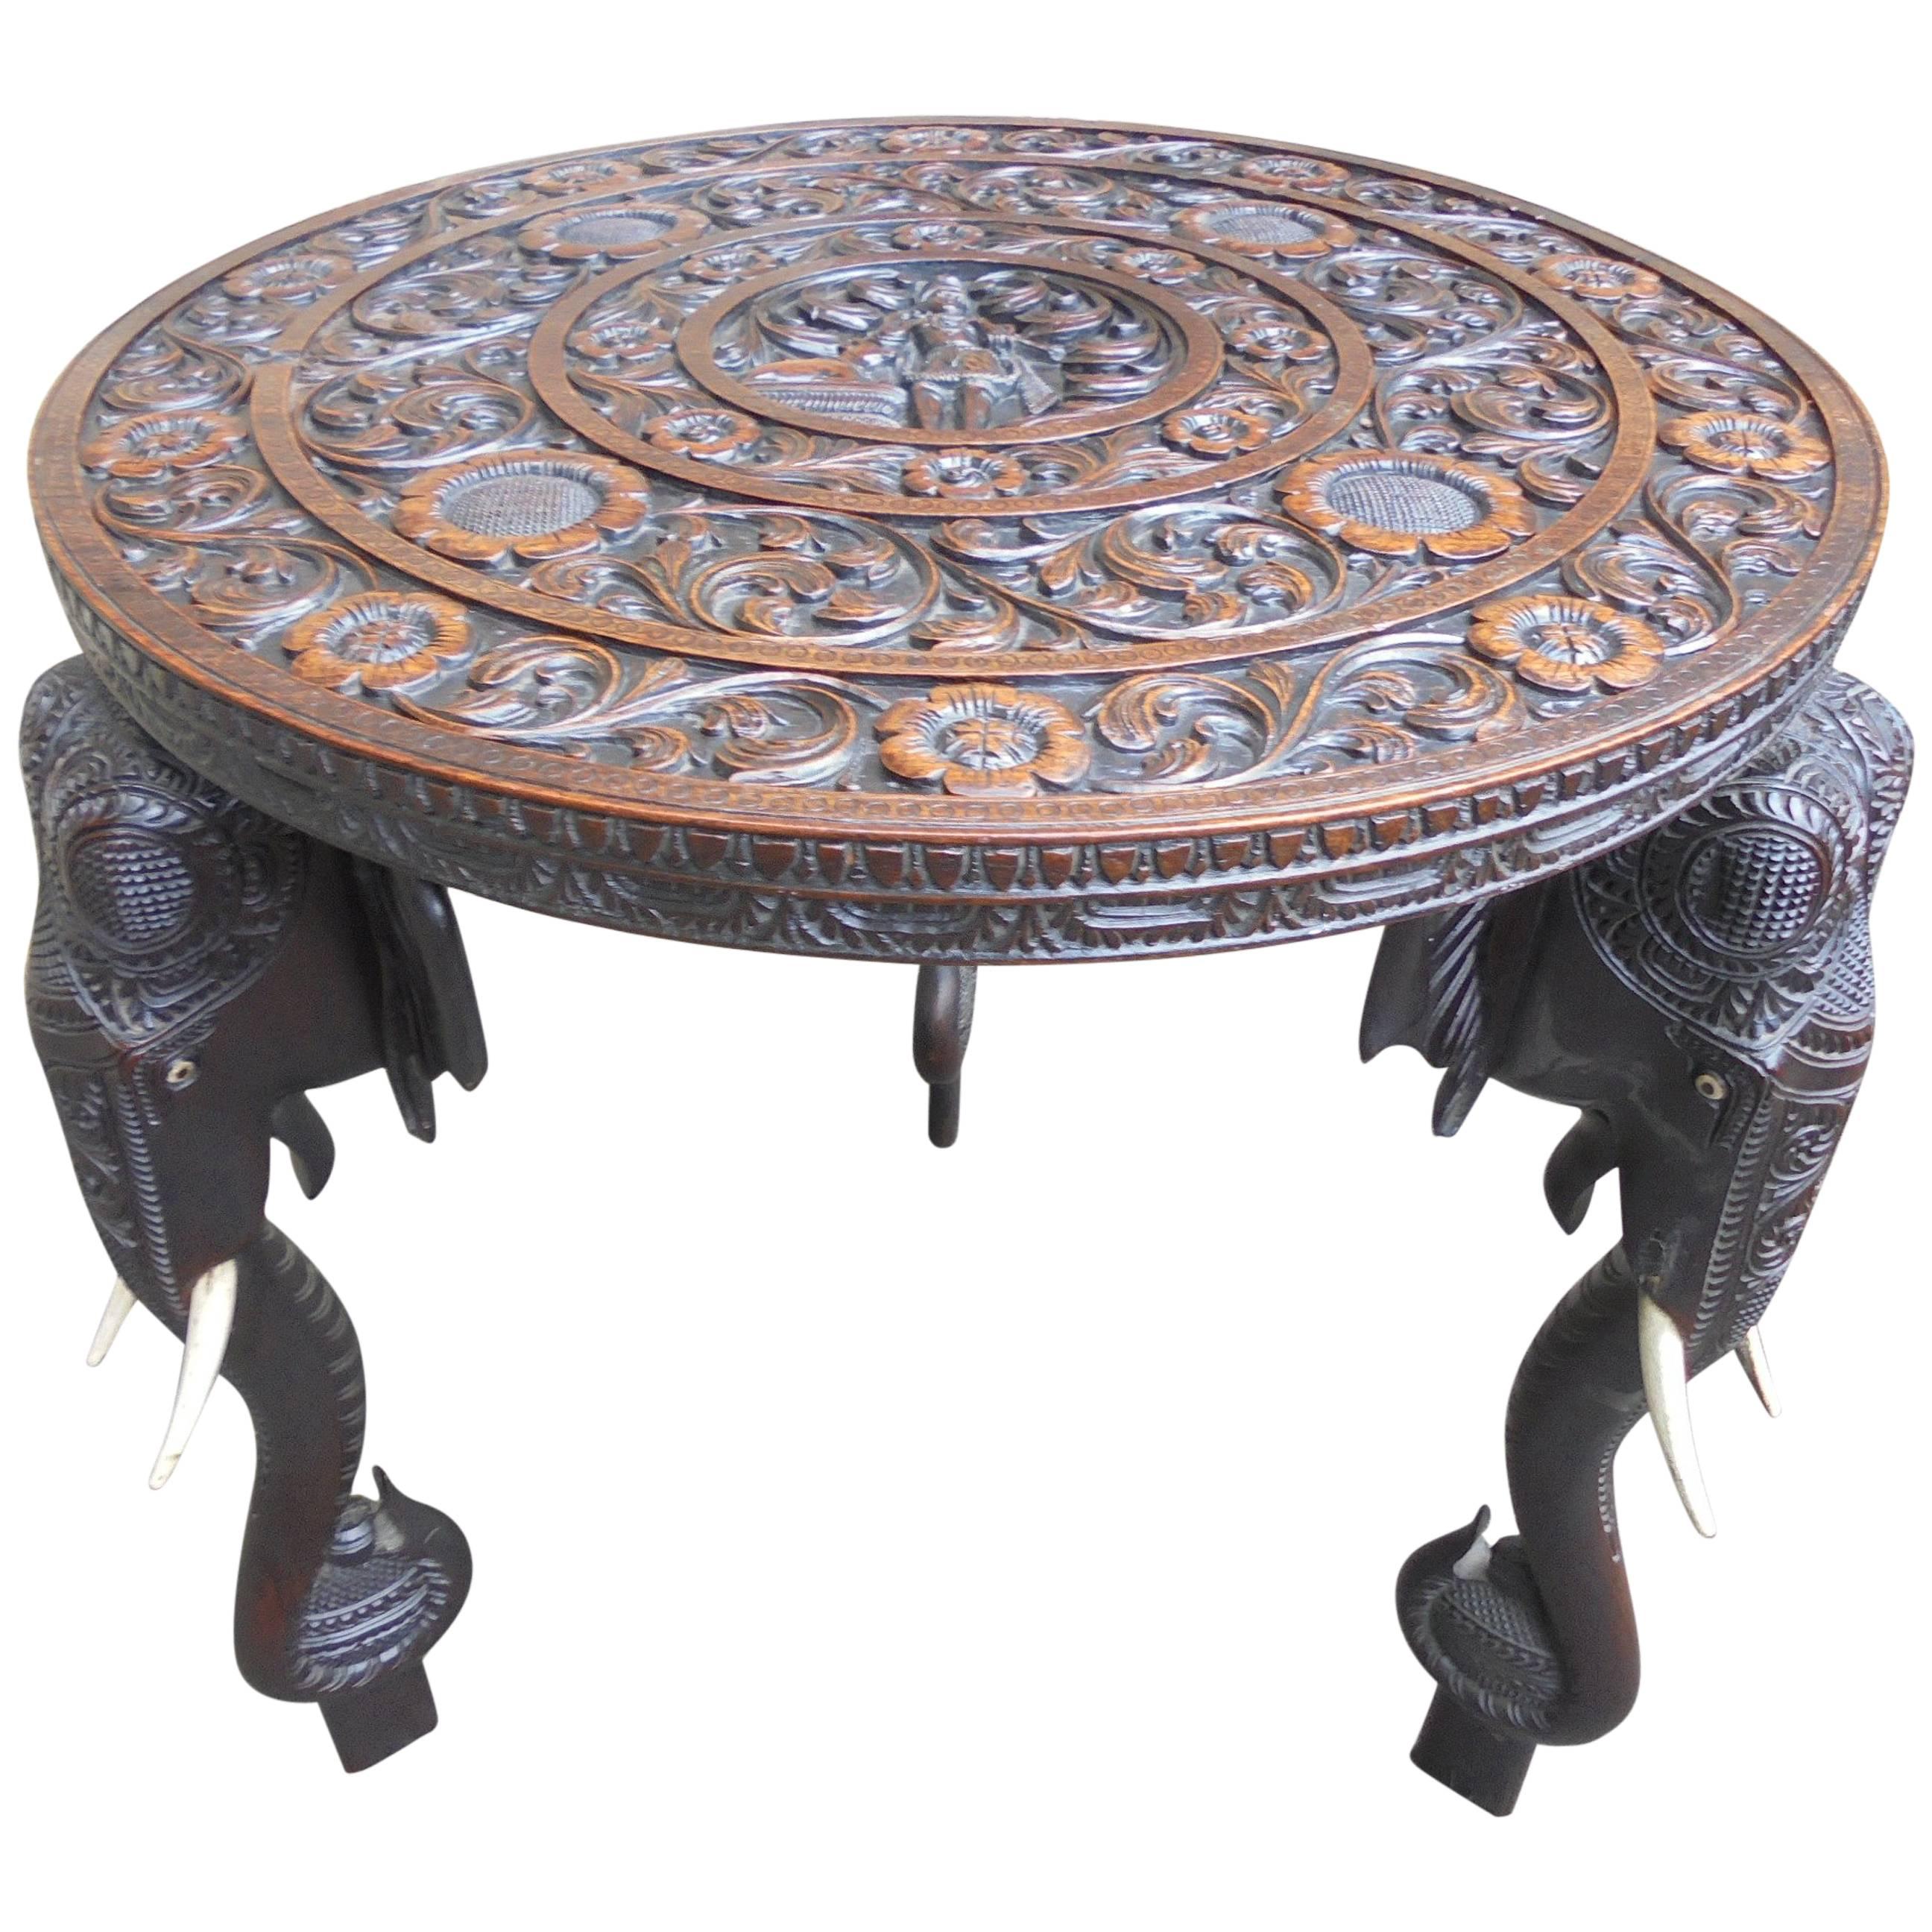 Antique Carved Anglo-Indian Teak Elephant Table For Sale